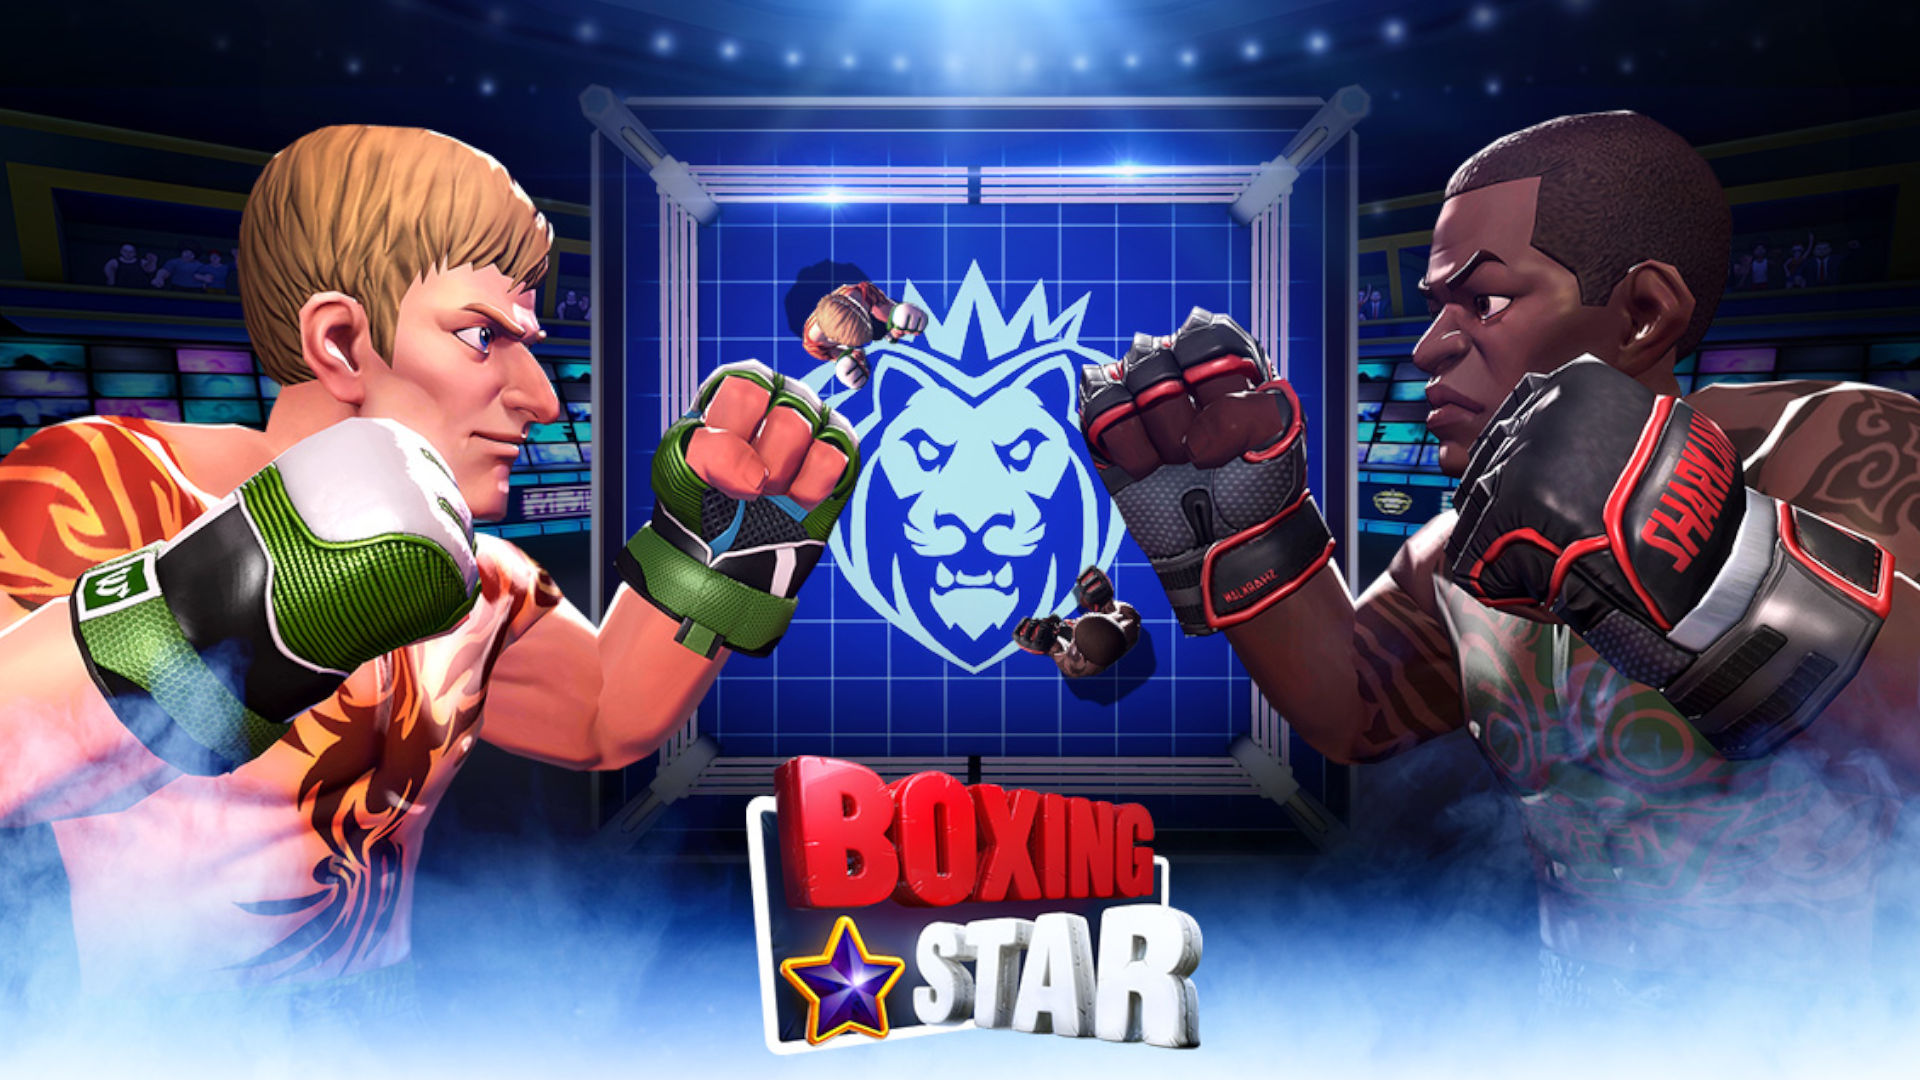 Cover art for boxing star, one of the mobile boxing games